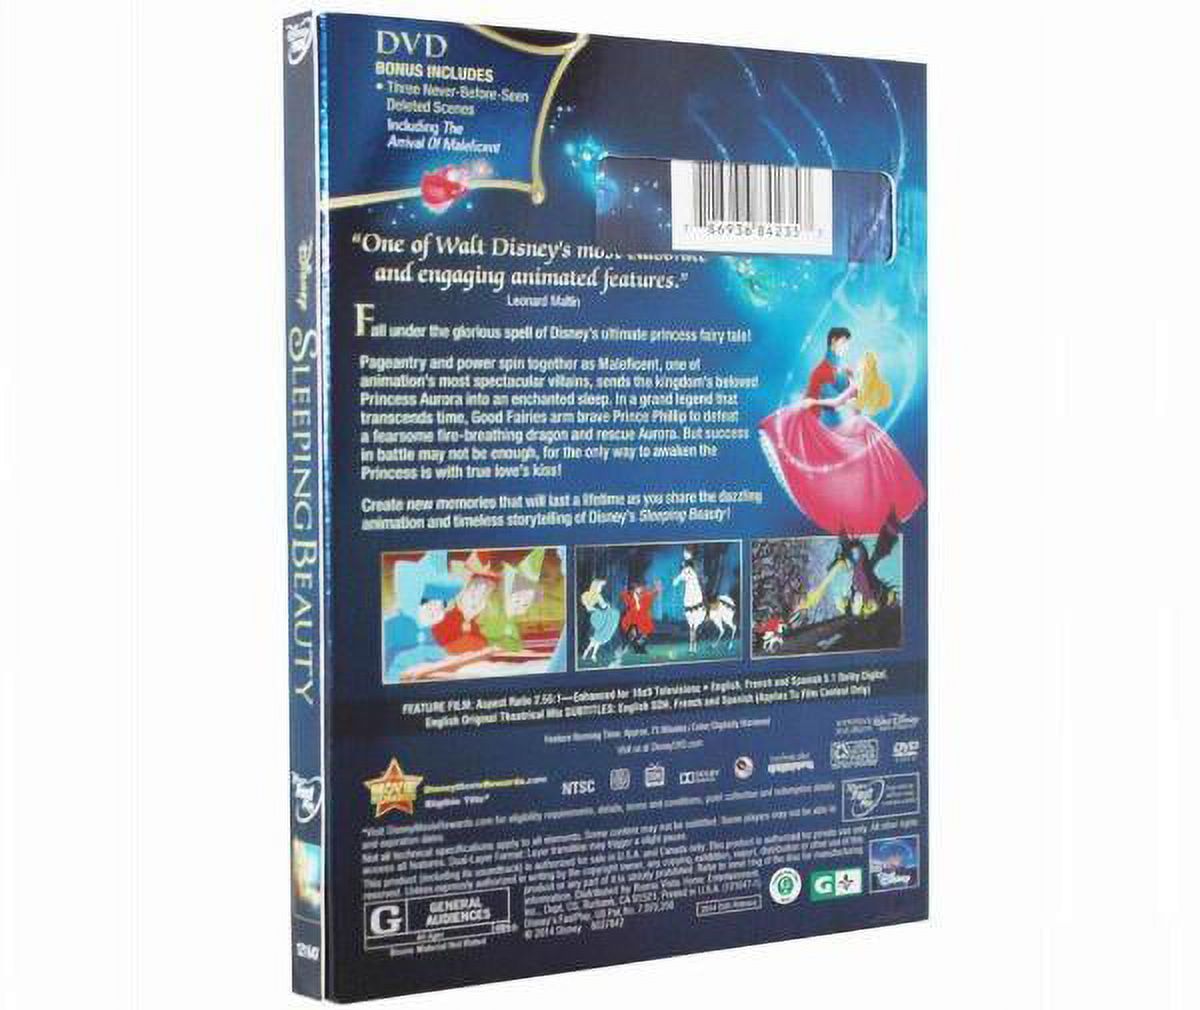 Sleeping Beauty [Diamond Edition] (DVD) directed by Clyde Geronimi, Eric Larson, Les Clark, Wolfgang Reitherman - image 2 of 3